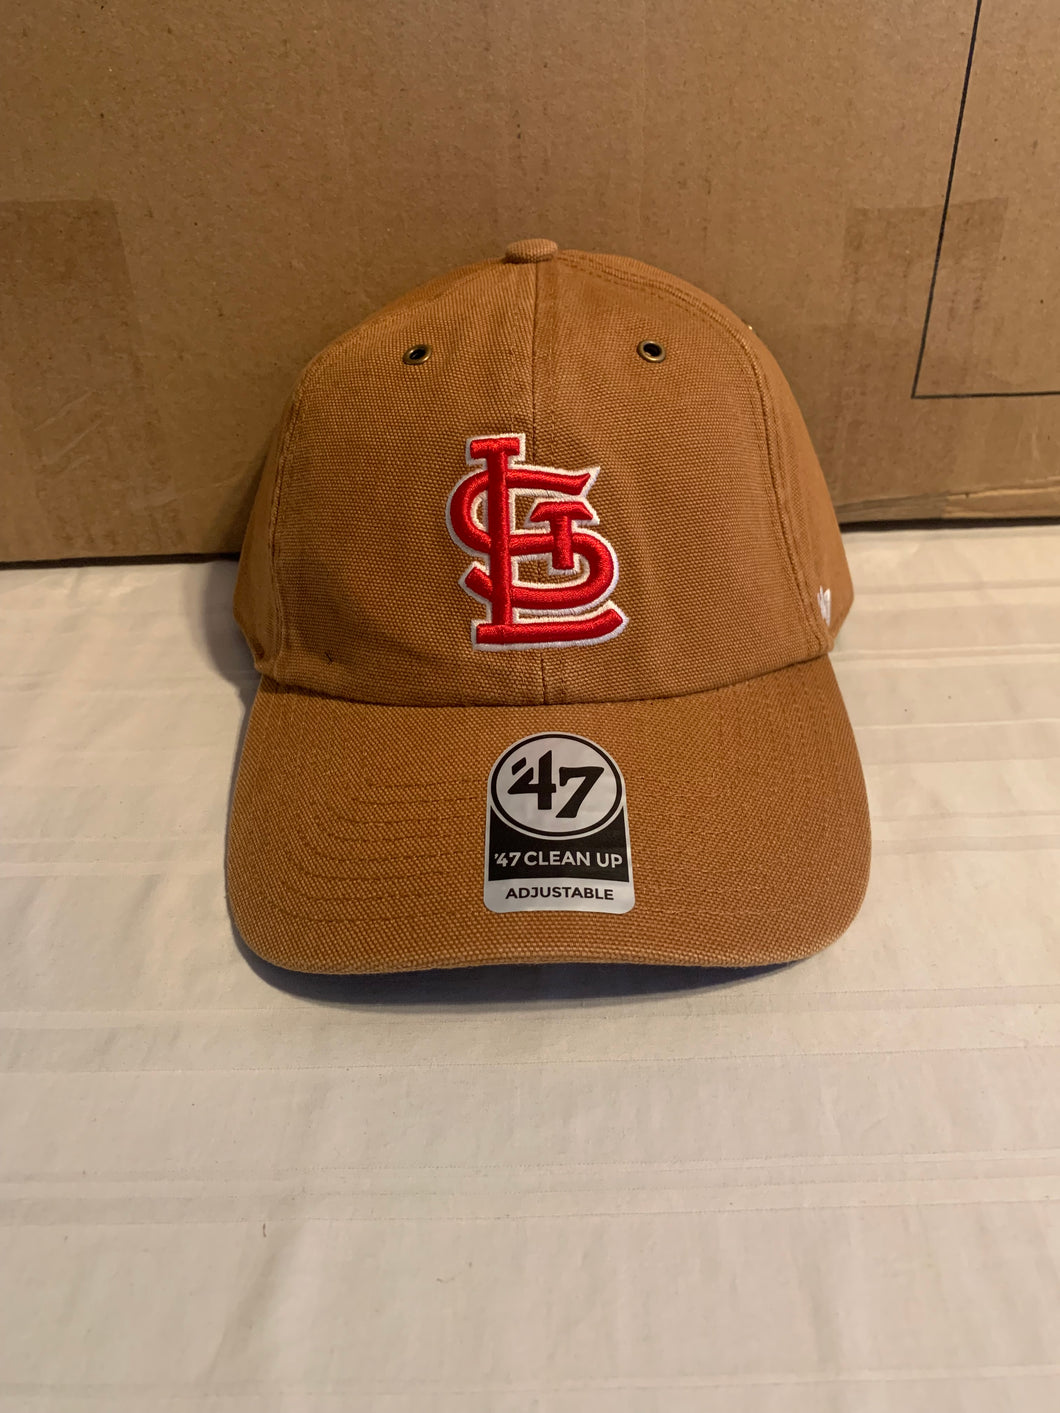 St. Louis Cardinals MLB '47 Brand Carhartt Brown Clean Up Adjustable Hat Cap - Casey's Sports Store